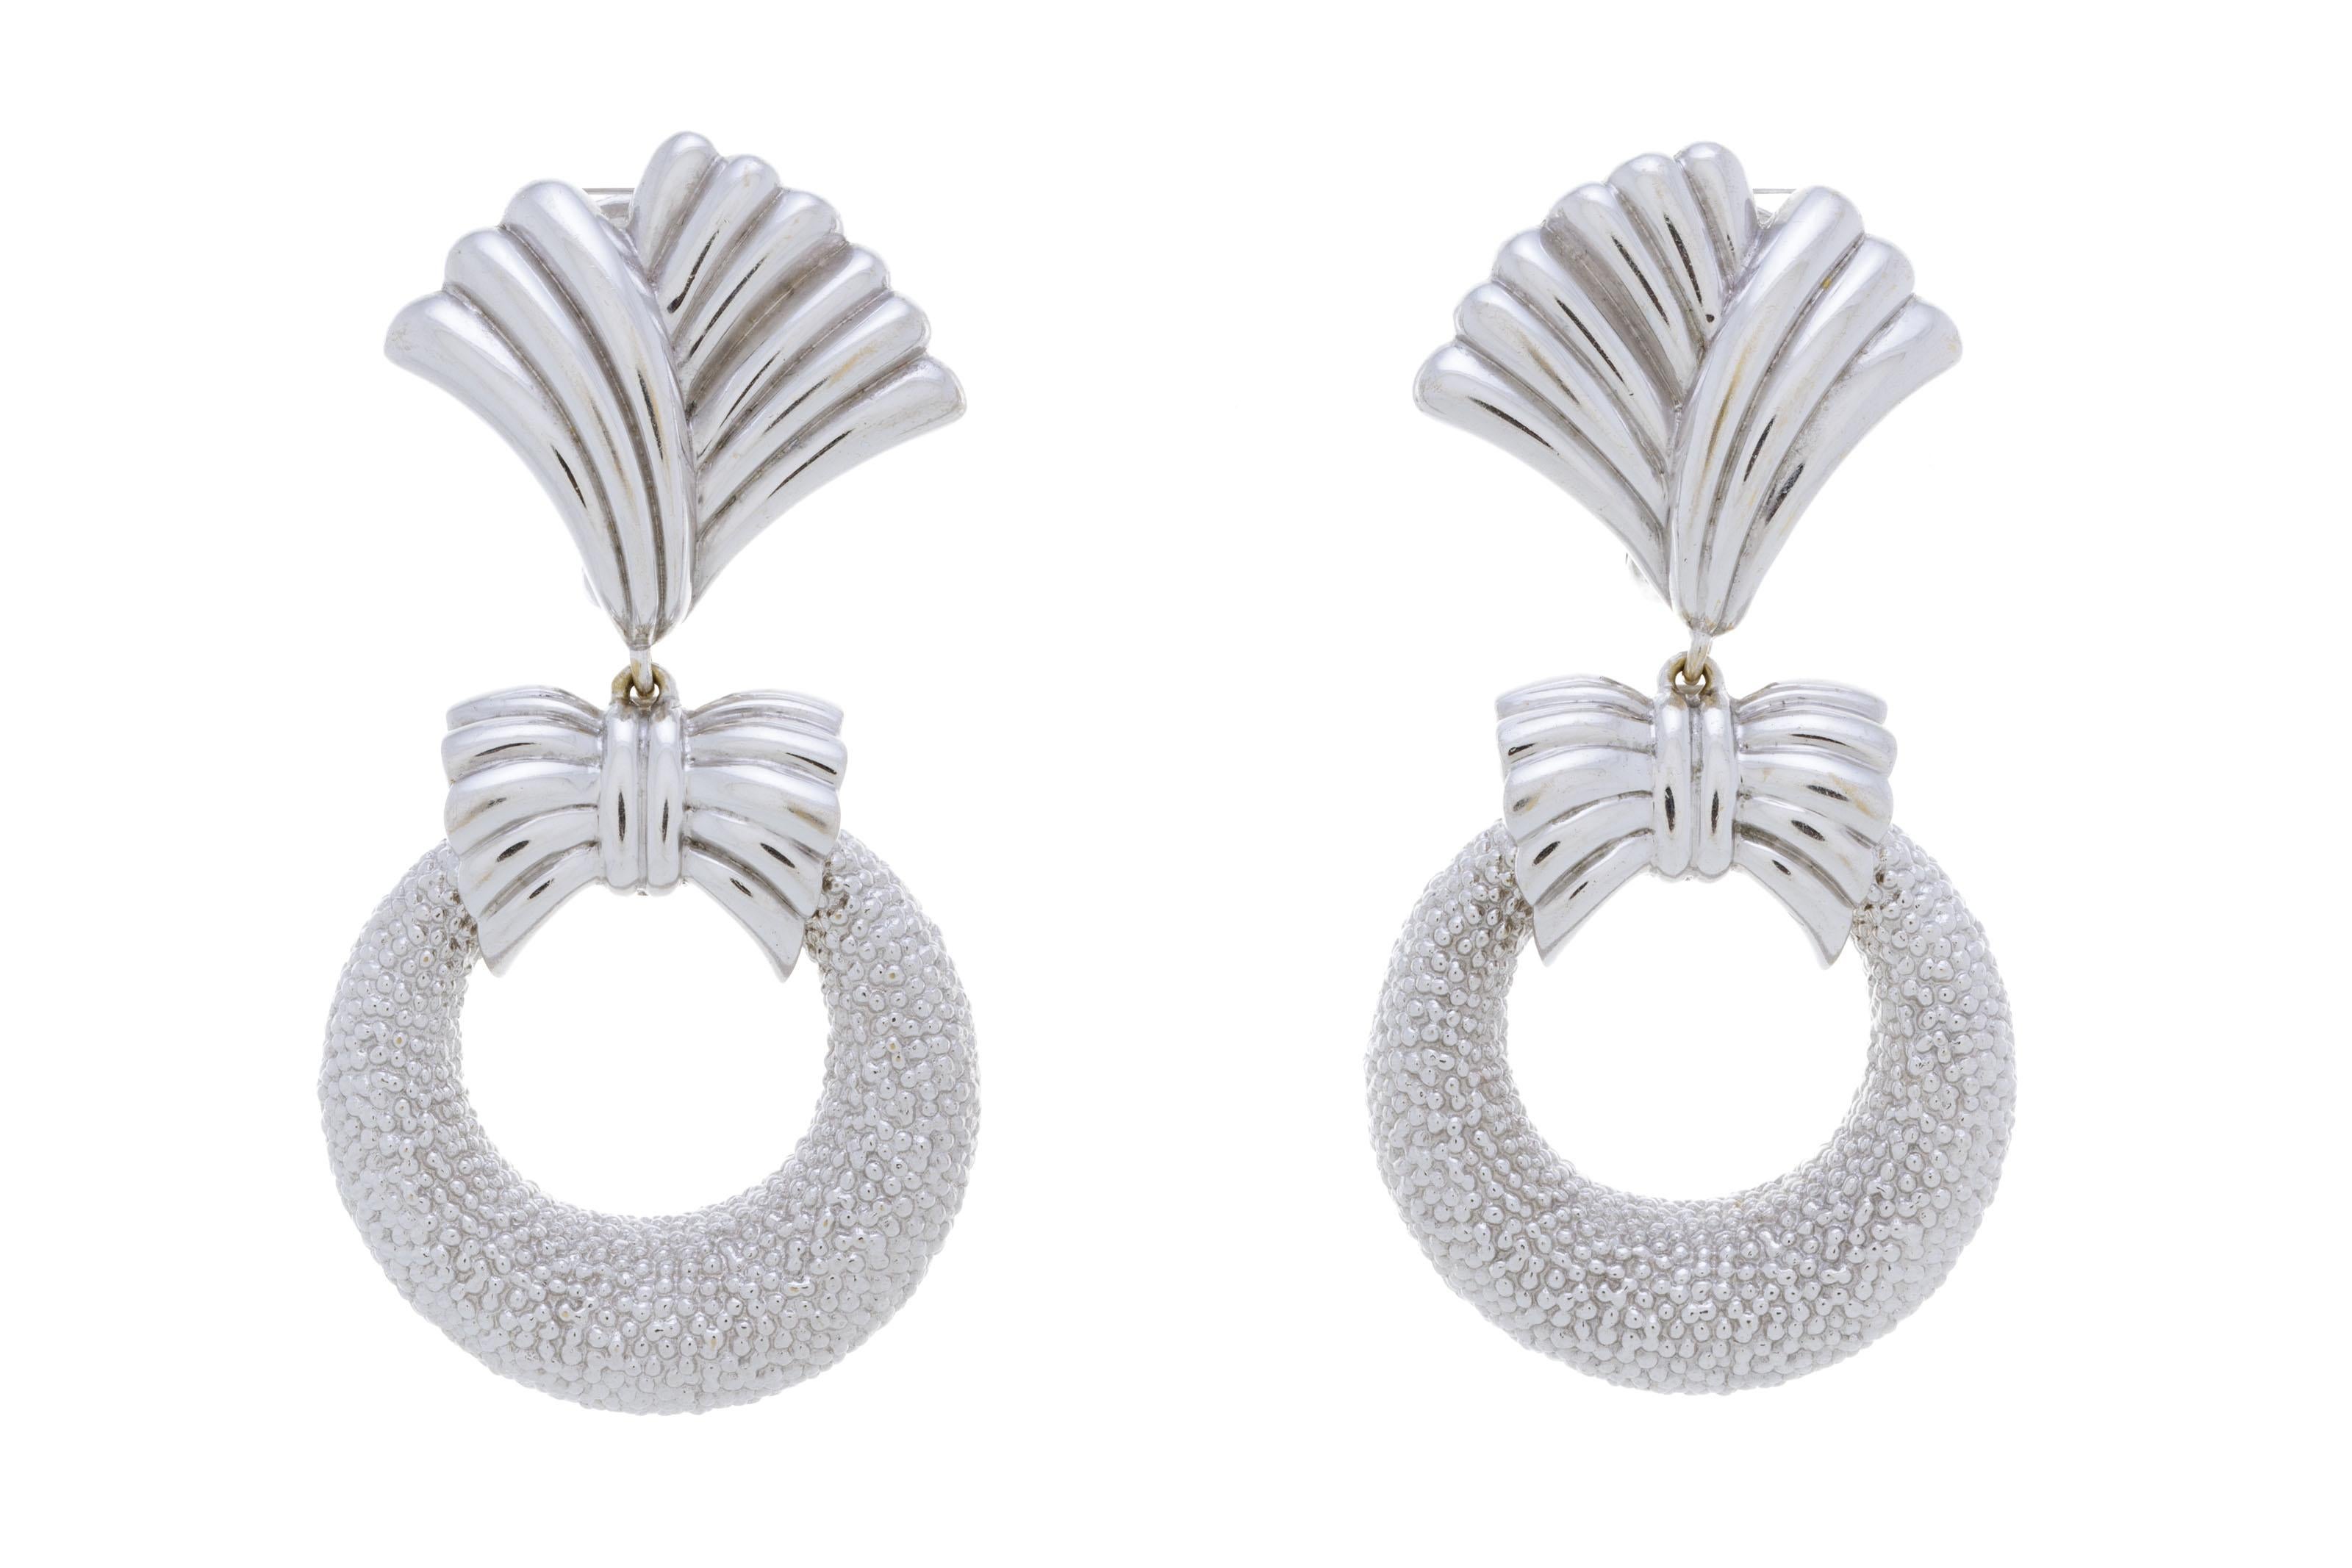 Presenting a rare marvel from Van Cleef & Arpels, these 5-in-1 earrings redefine opulence. A fixed white gold ear piece, 5.5 cm in height, anchors the design. Below it, interchangeable loops in hammered white gold, turquoise, mother of pearl,